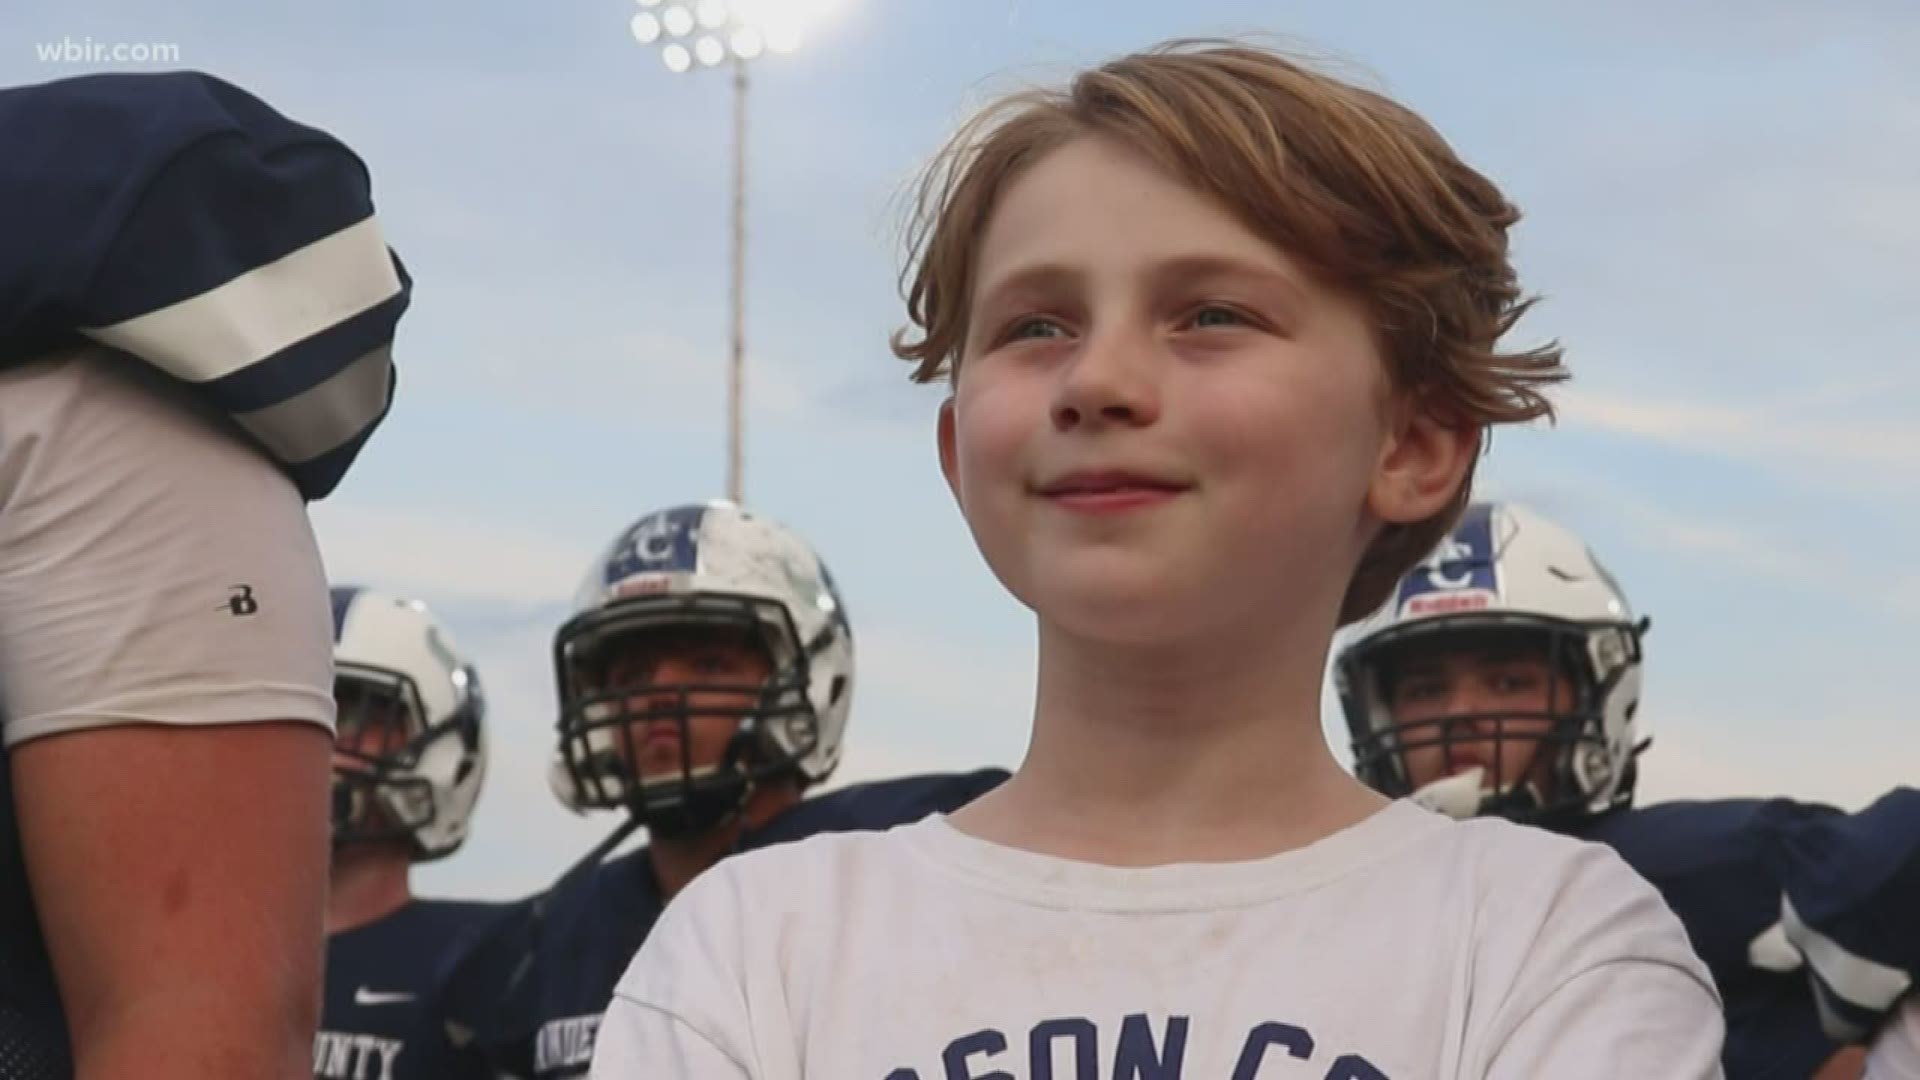 In Anderson County, the football team has a special relationship with local elementary school students.